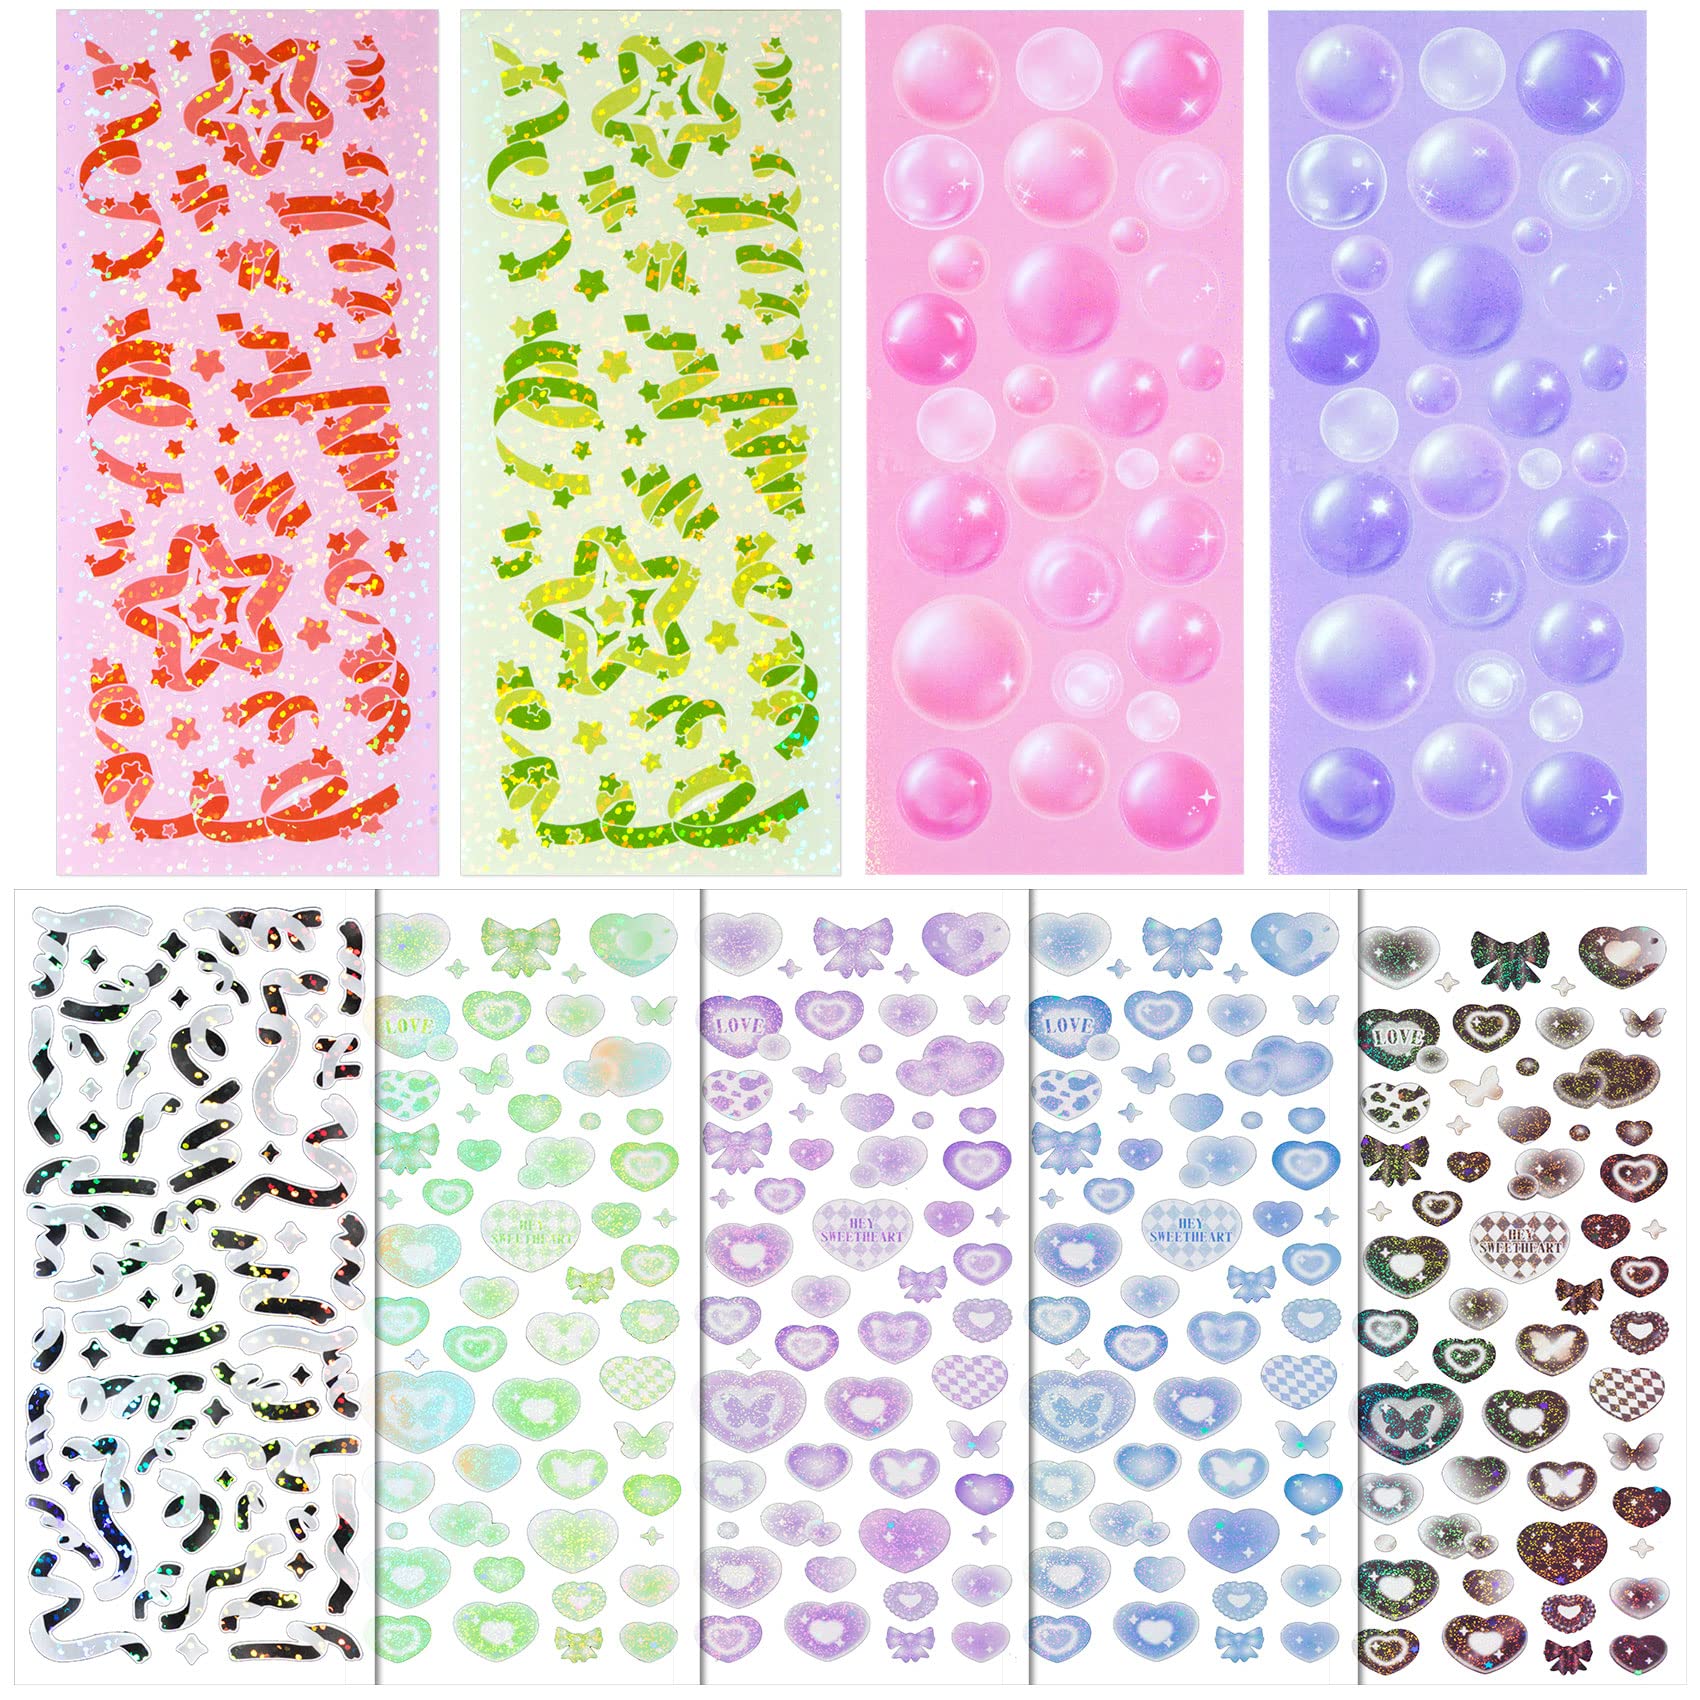 HINZIC 18 Sheets Kpop Photocard Korean Stickers Set Colorful Glitter Self  Adhesive Deco Stickers Ribbon Sweetheart Butterfly Bubble Cute Korean Deco  Stickers for Scrapbook DIY Decor Arts Card Crafts